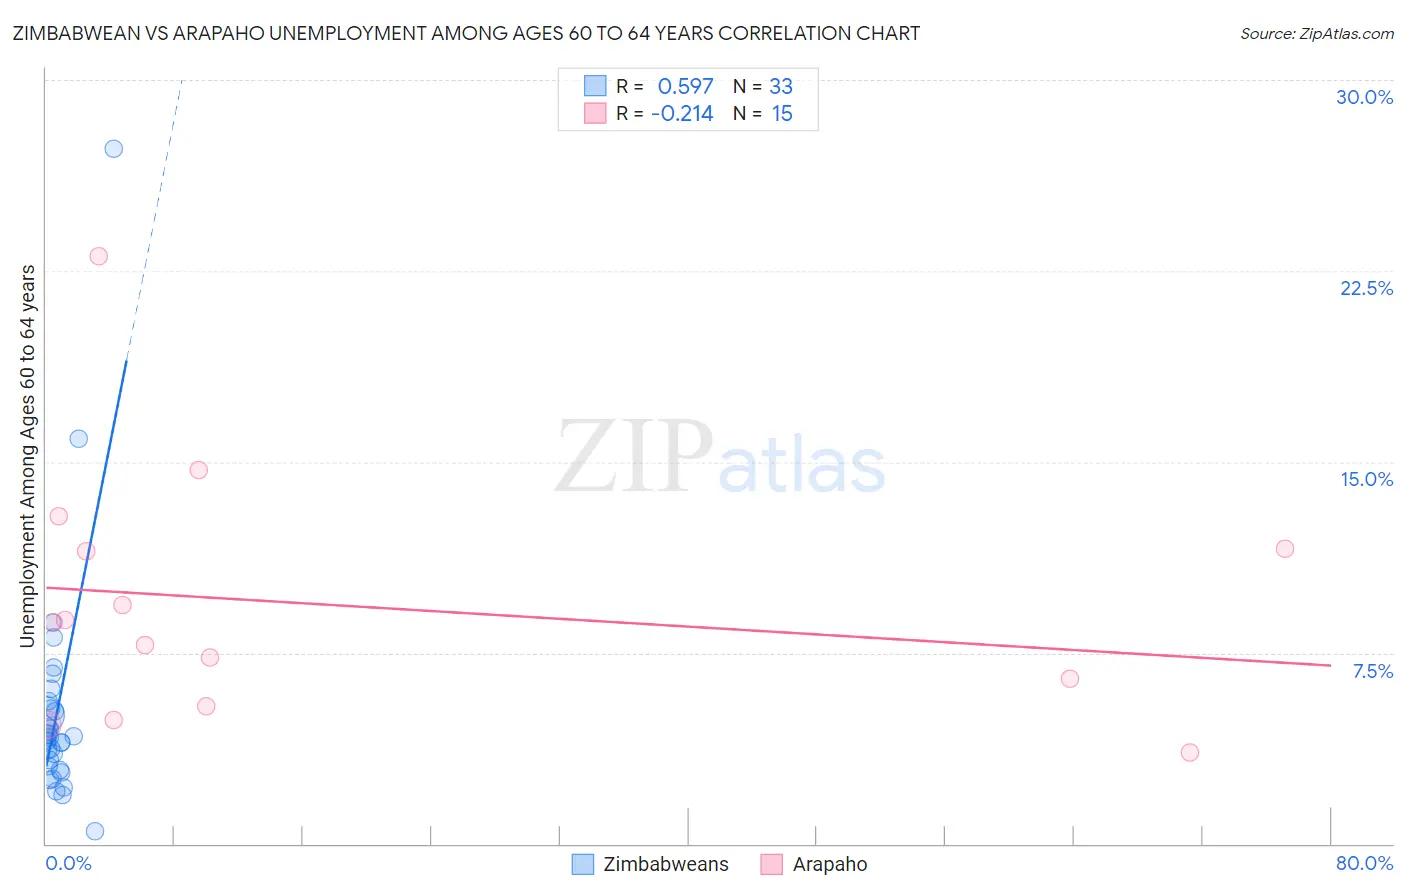 Zimbabwean vs Arapaho Unemployment Among Ages 60 to 64 years